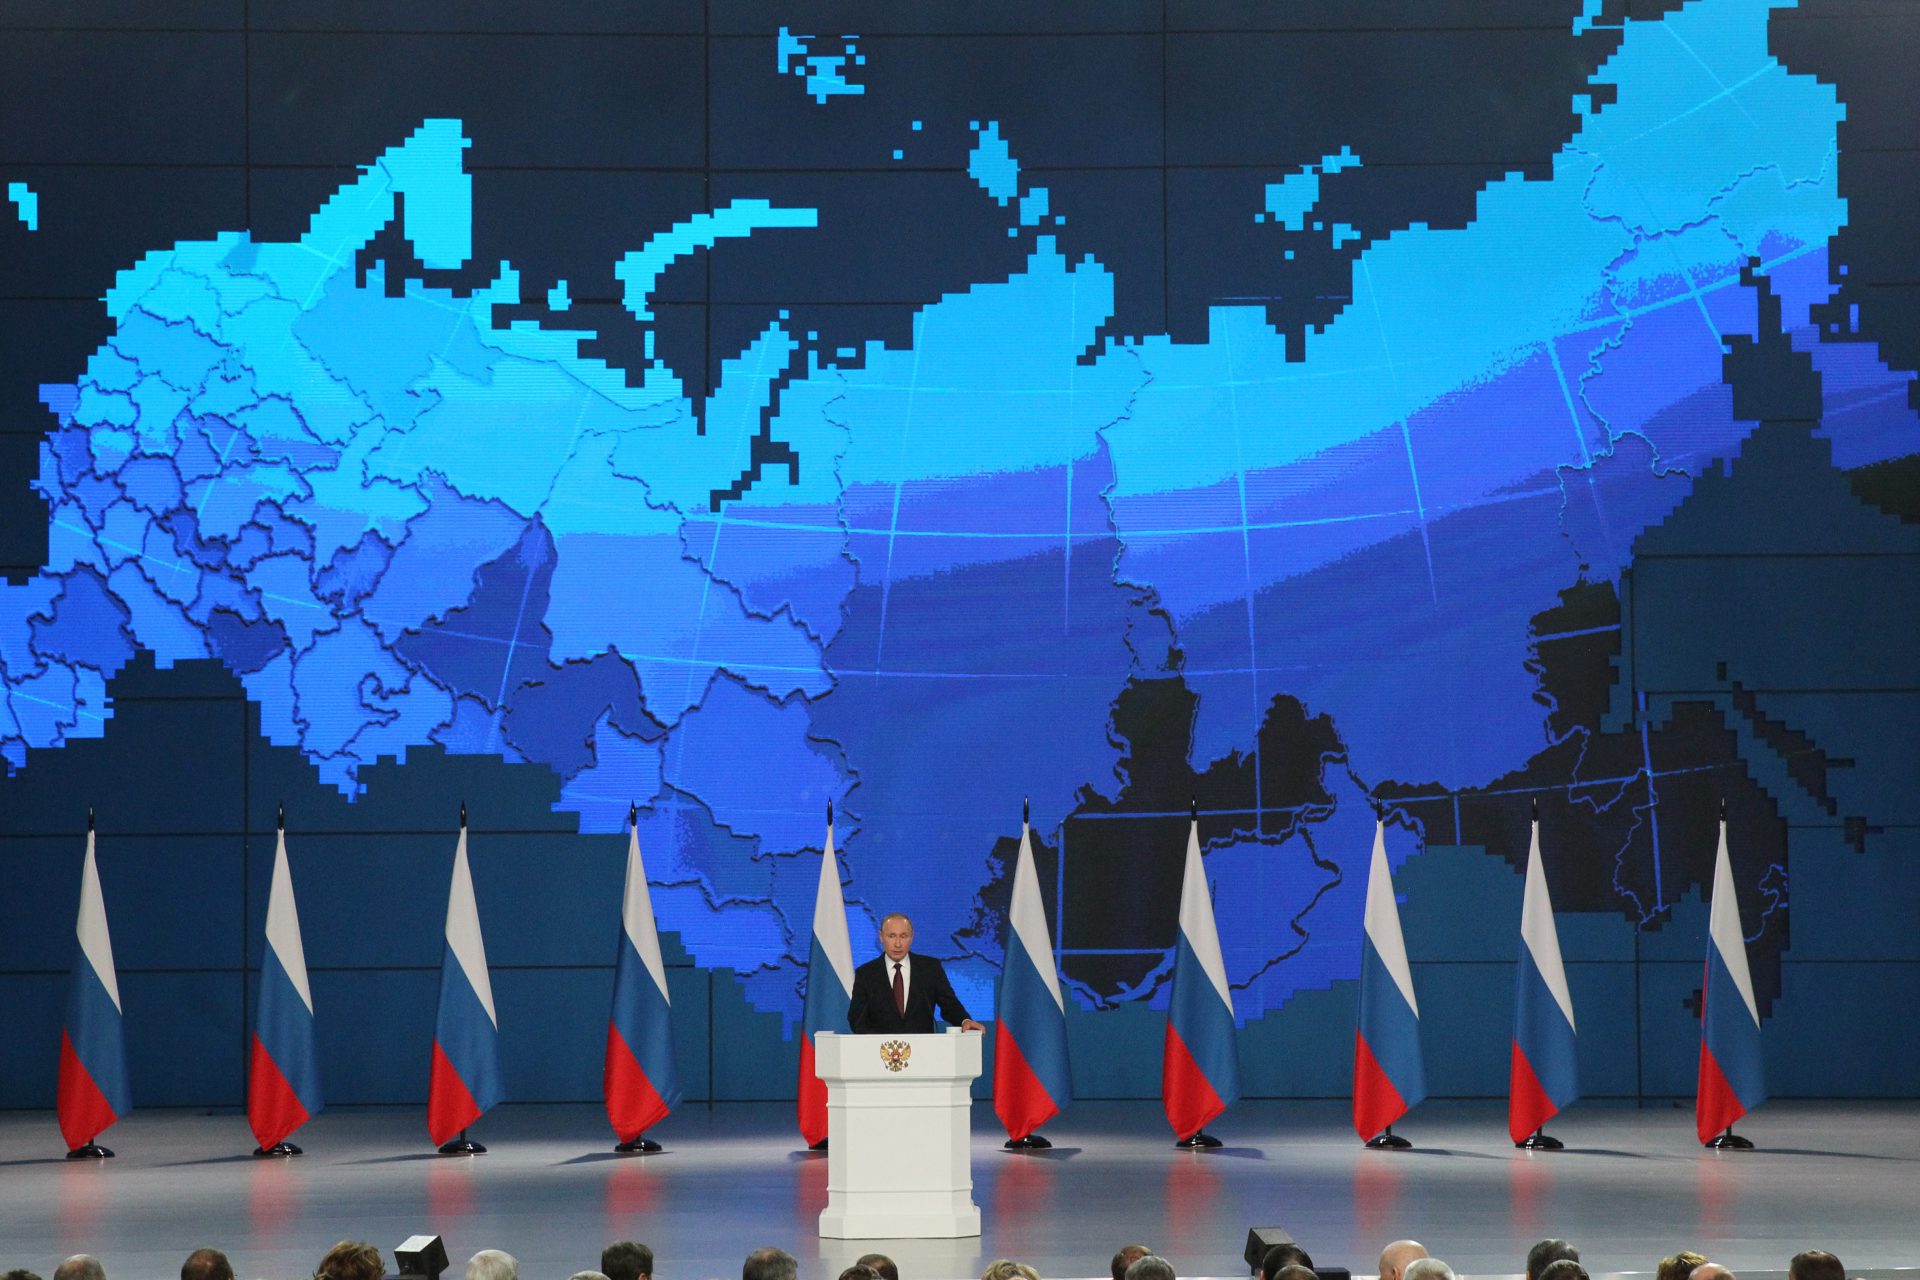 <p><span>Not unlike some regions in Canada, the European Union, or the United States, there are republics in Russia that are not as financially productive as other republics or areas and are given subsidies to help offset their costs to operate according to Kommersant. </span></p>